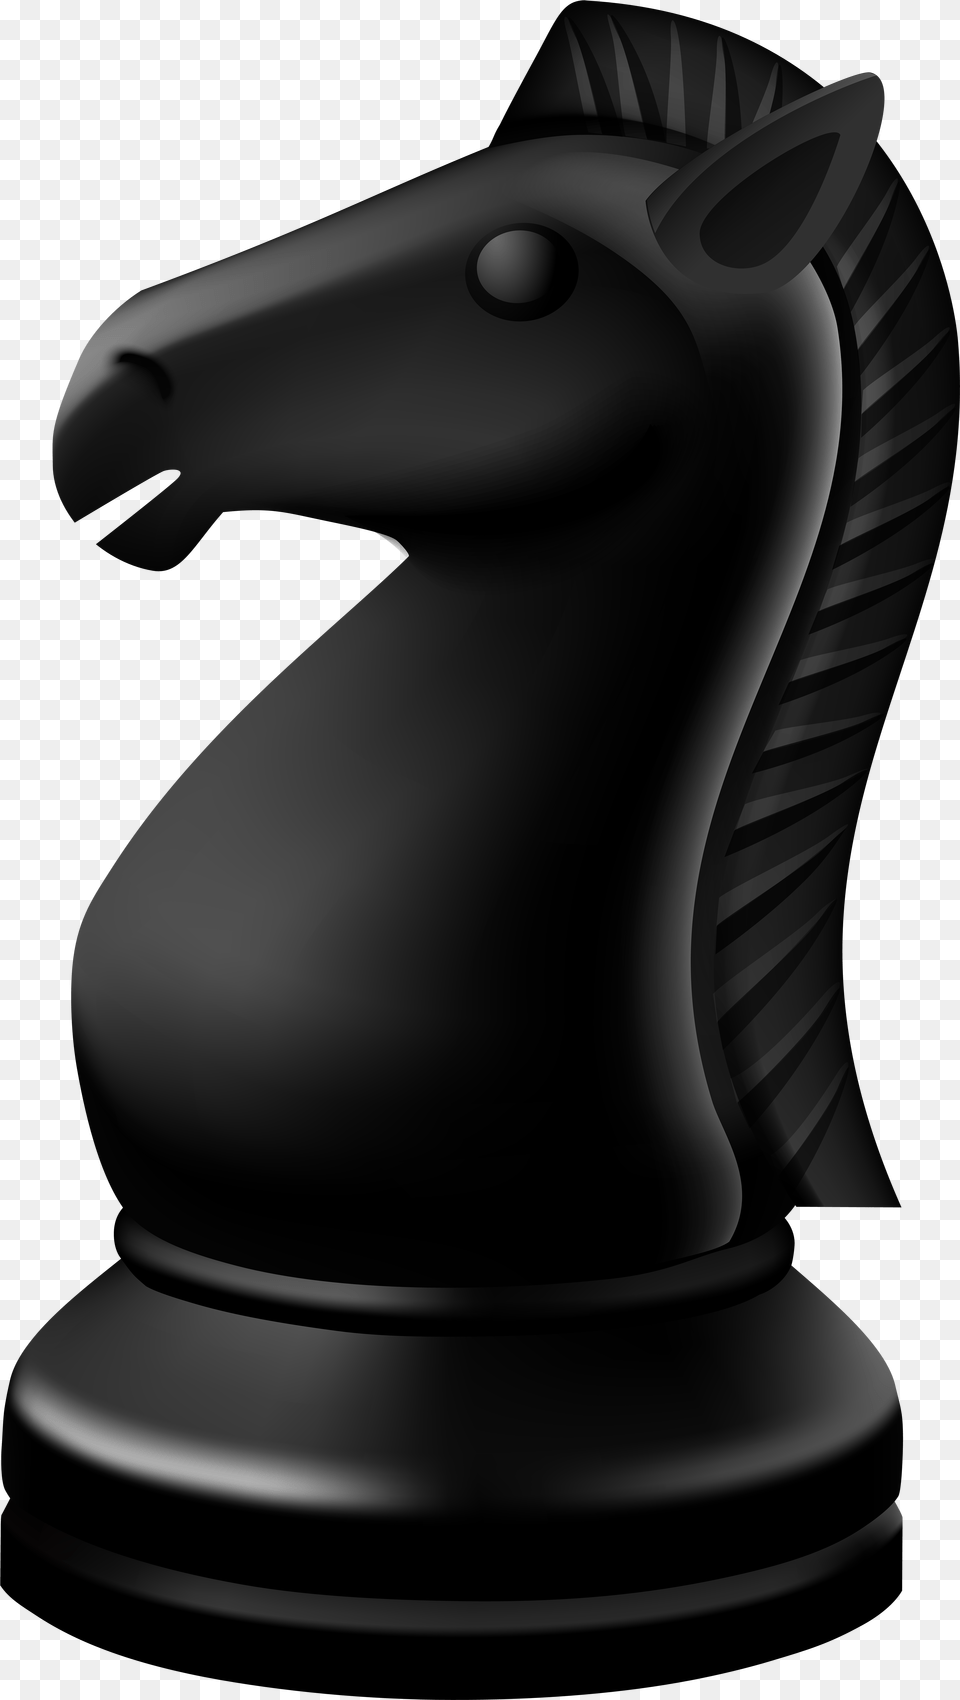 Black Chess Piece Images Toppng Chess Piece Transparent, Disk Png Image